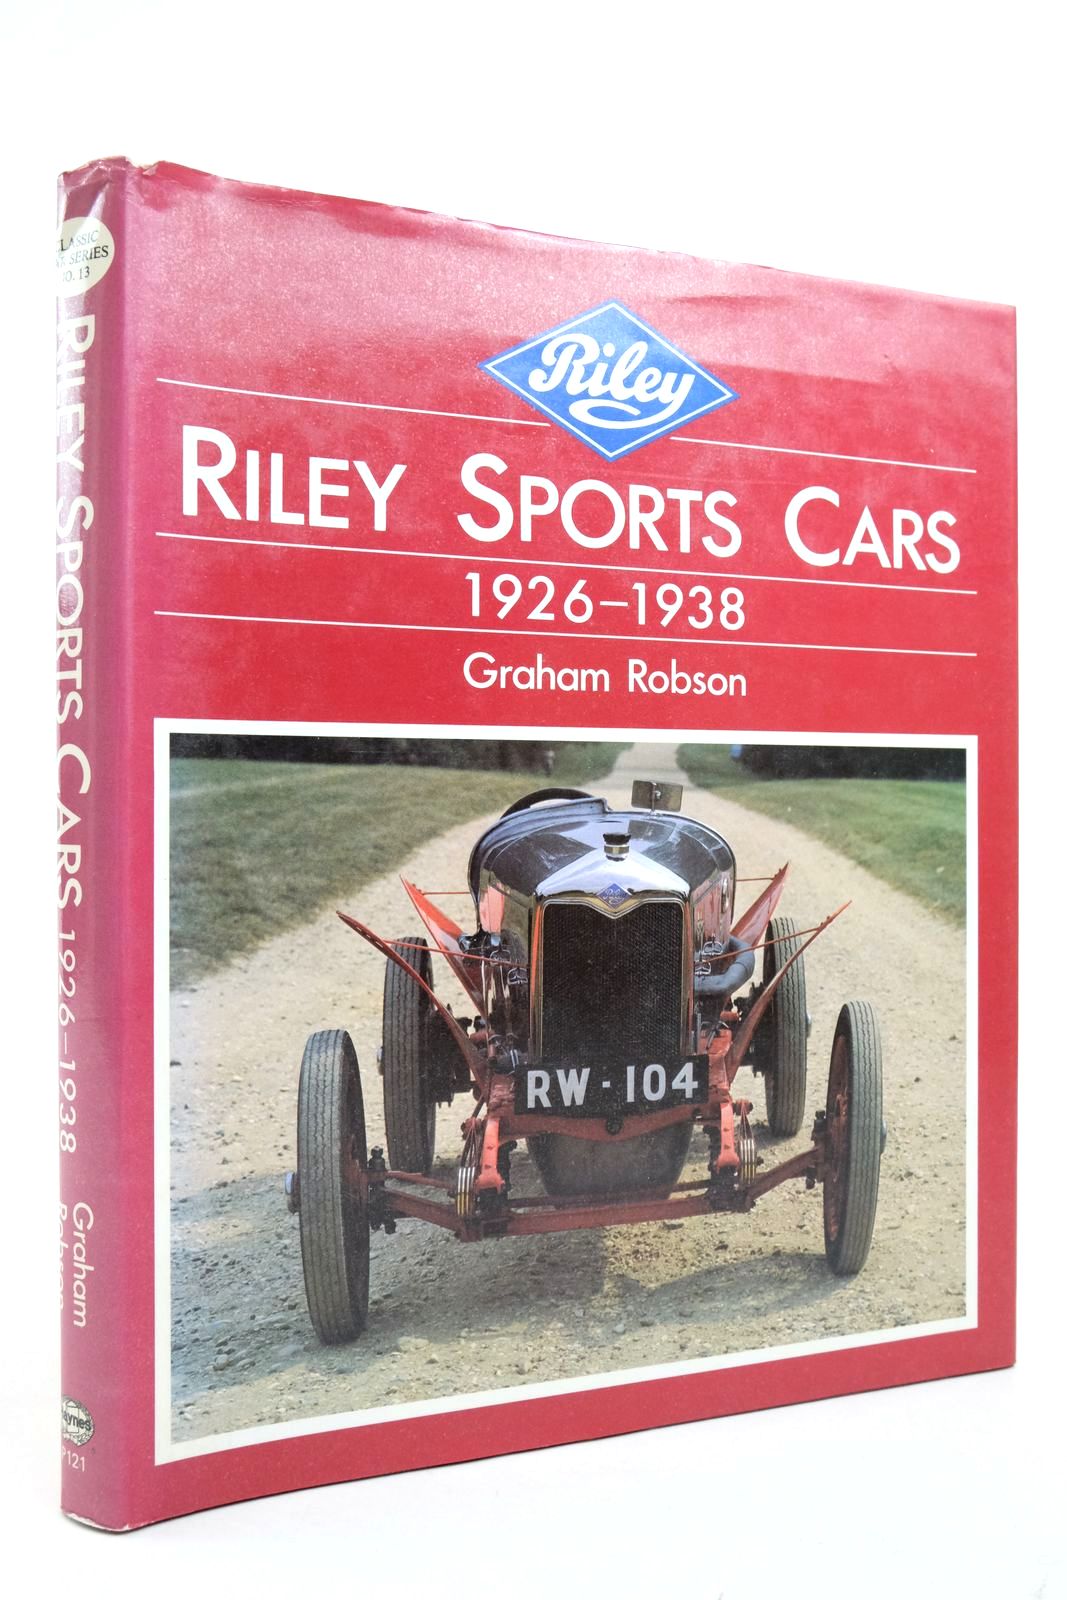 Photo of RILEY SPORTS CARS 1926-1938 written by Robson, Graham published by The Oxford Illustrated Press, Haynes (STOCK CODE: 2136804)  for sale by Stella & Rose's Books